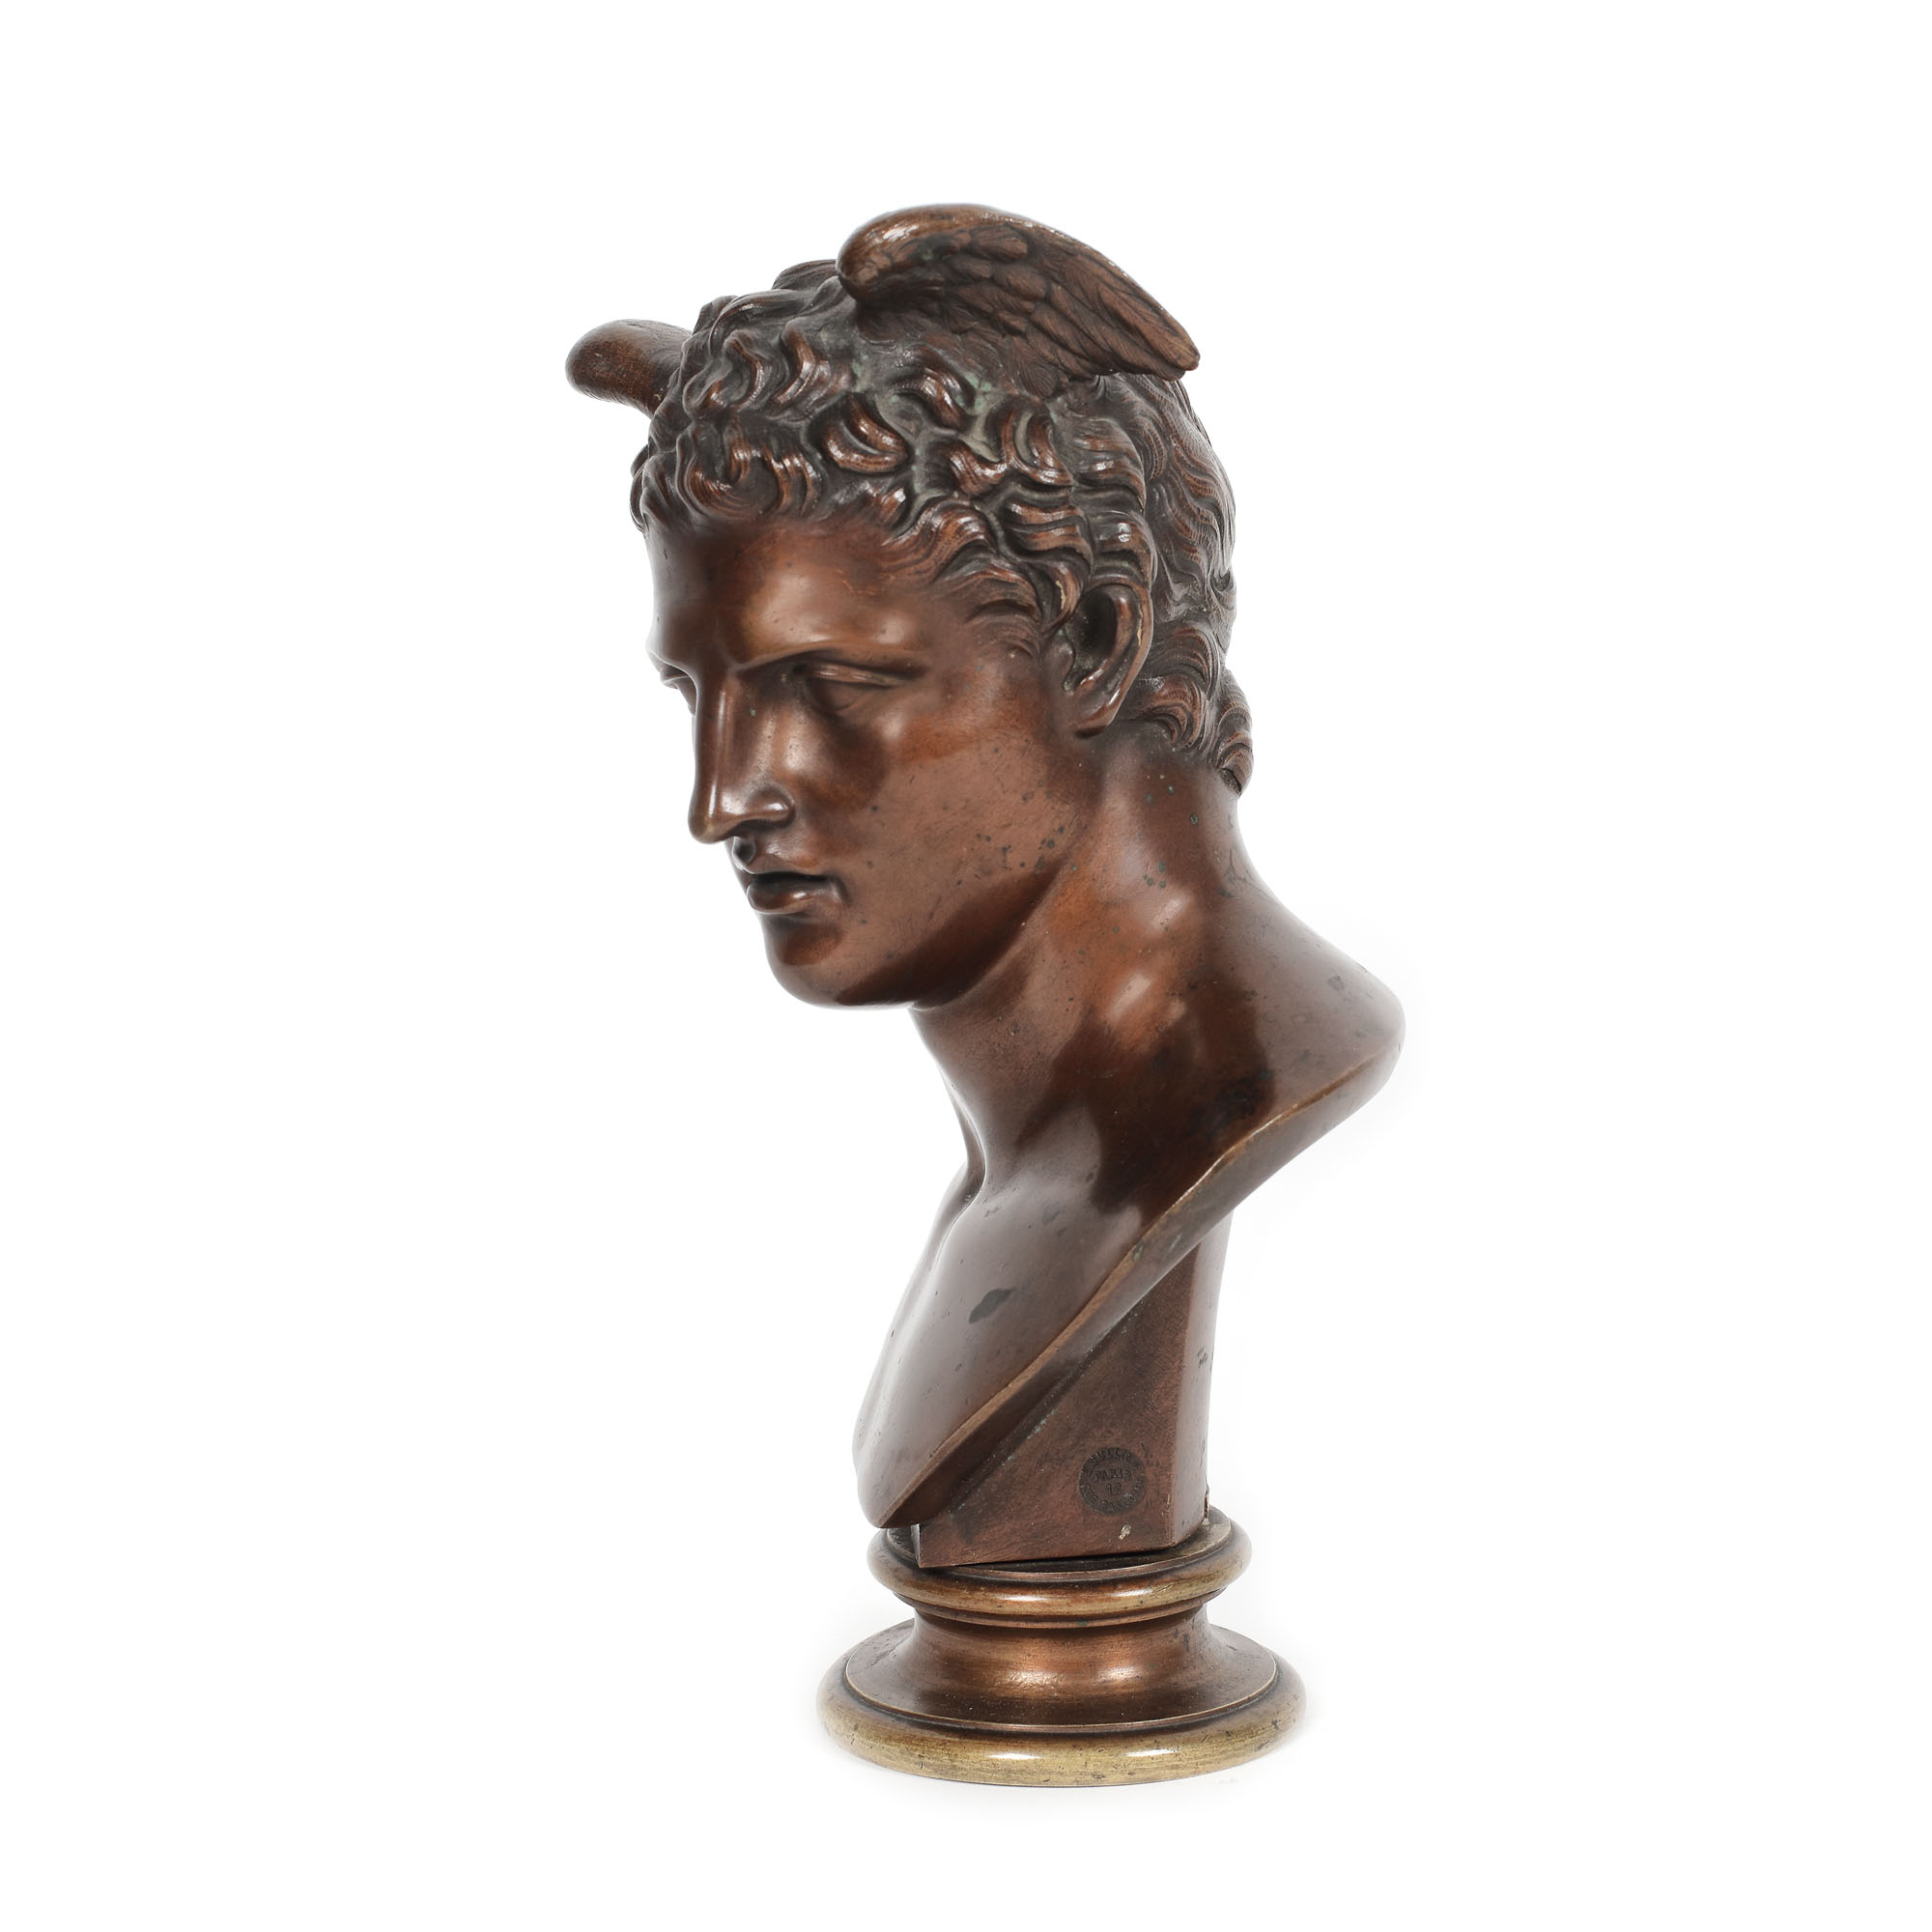 French workshop, Hermes - decorative bronze sculpture E. Jullien, second half of the 19th century - Image 2 of 4